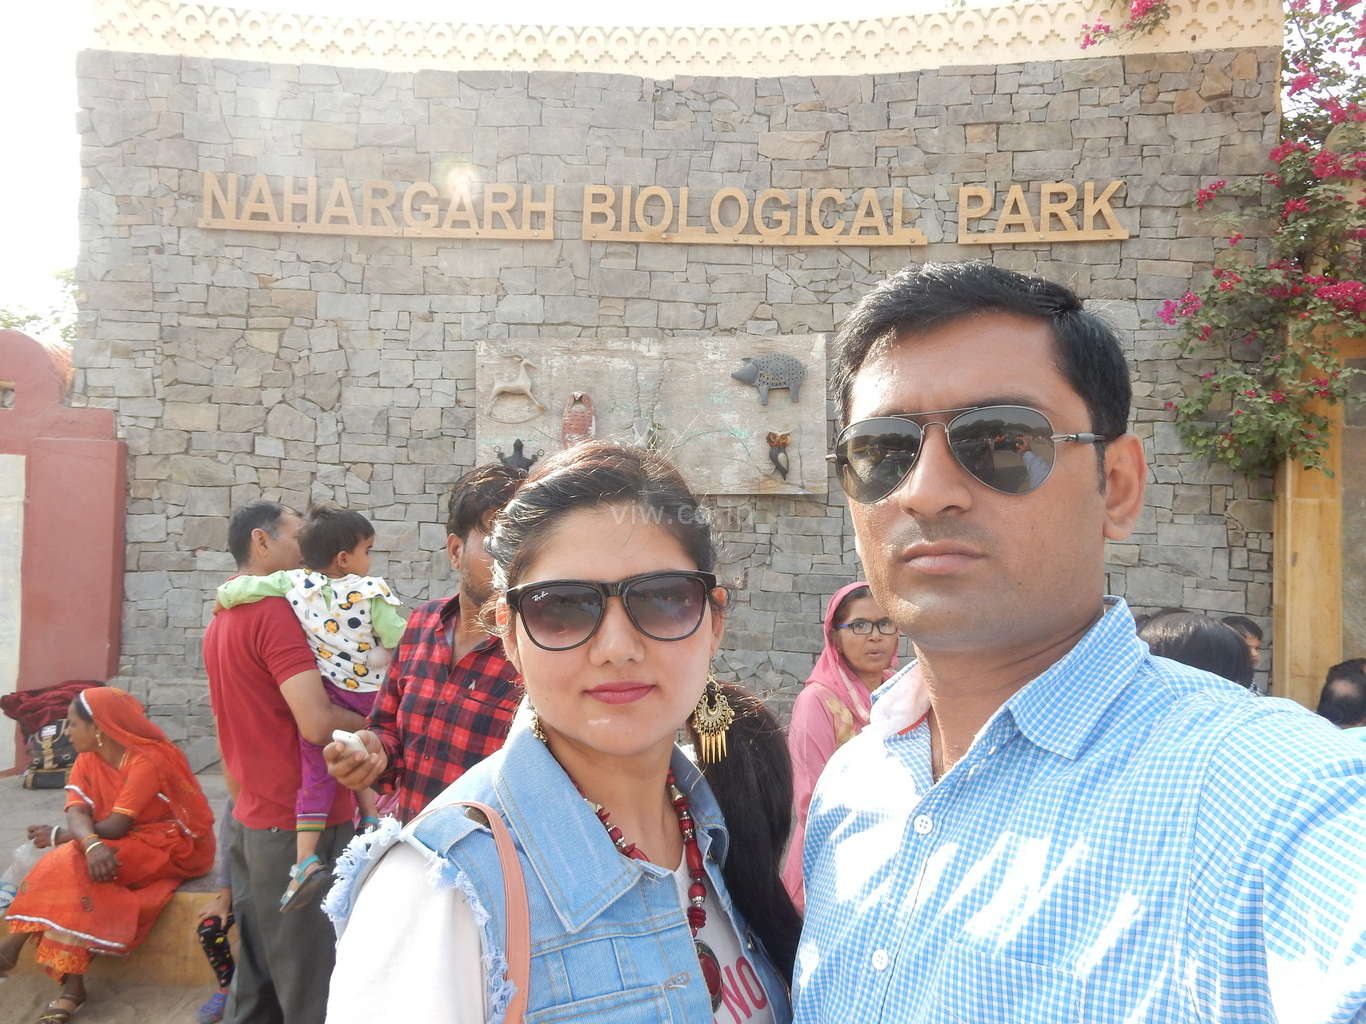 Entry point of nahargarh biological park zoo